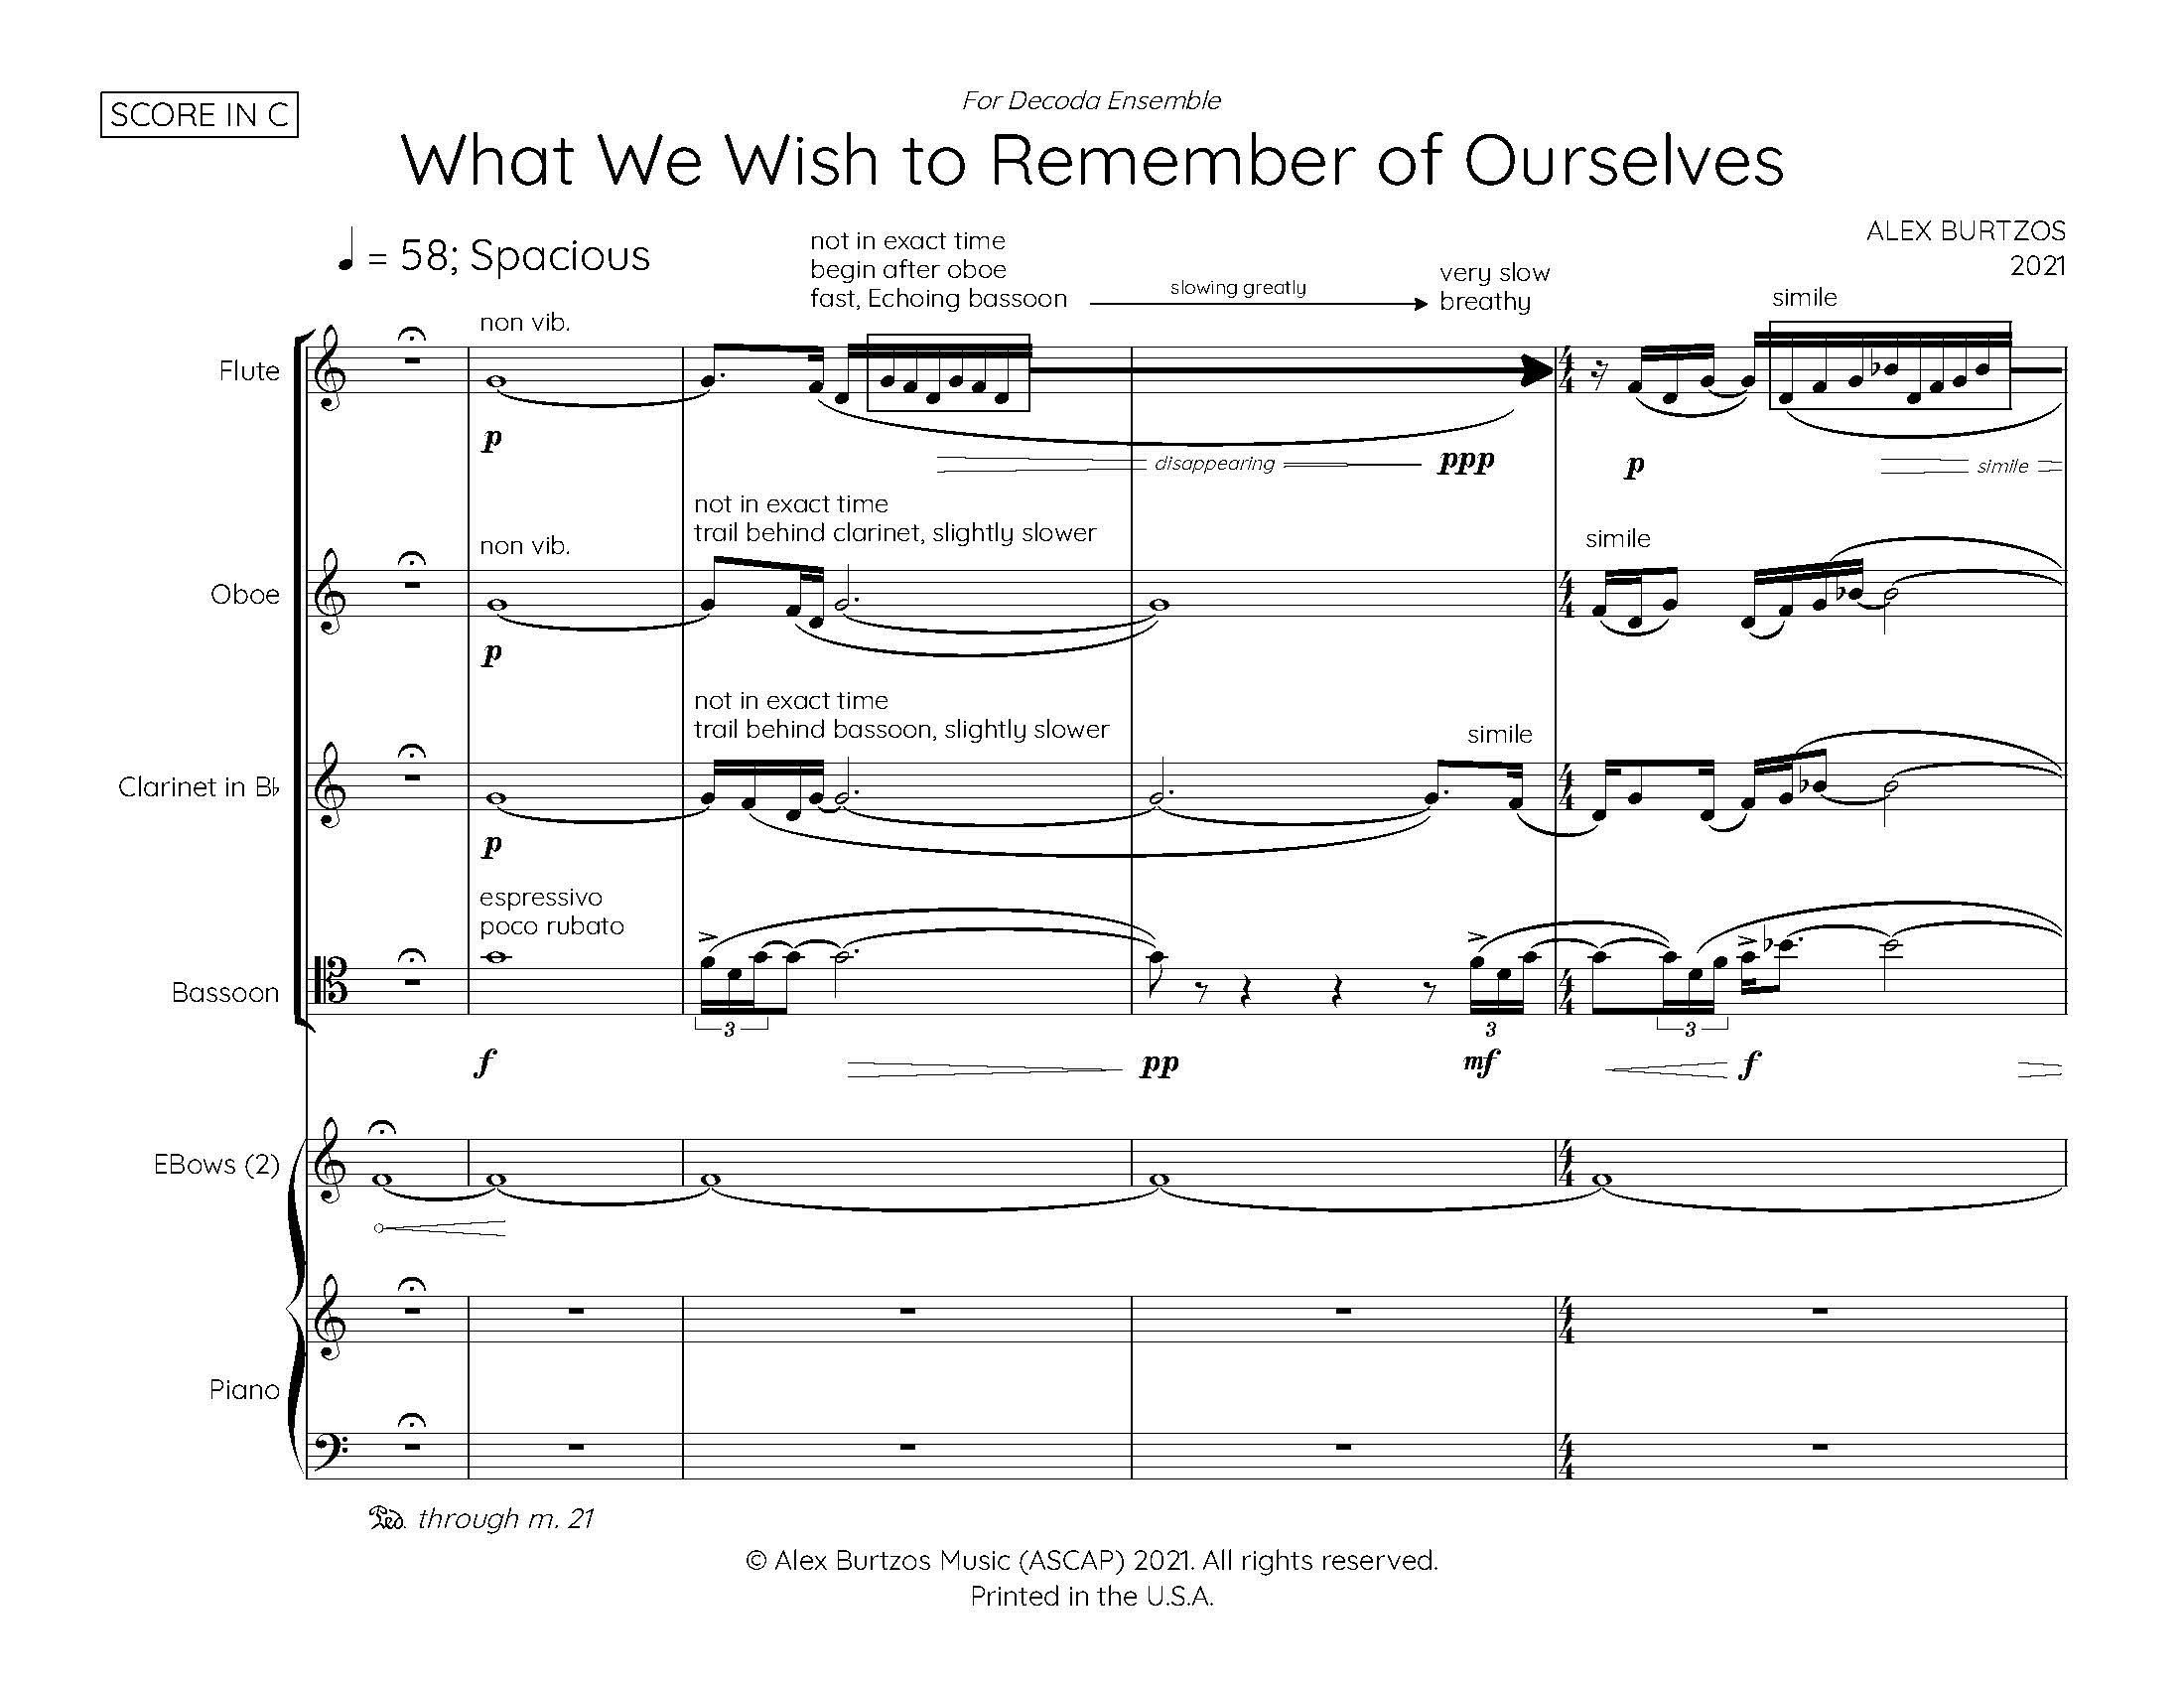 What We Wish to Remember of Ourselves - Complete Score_Page_07.jpg